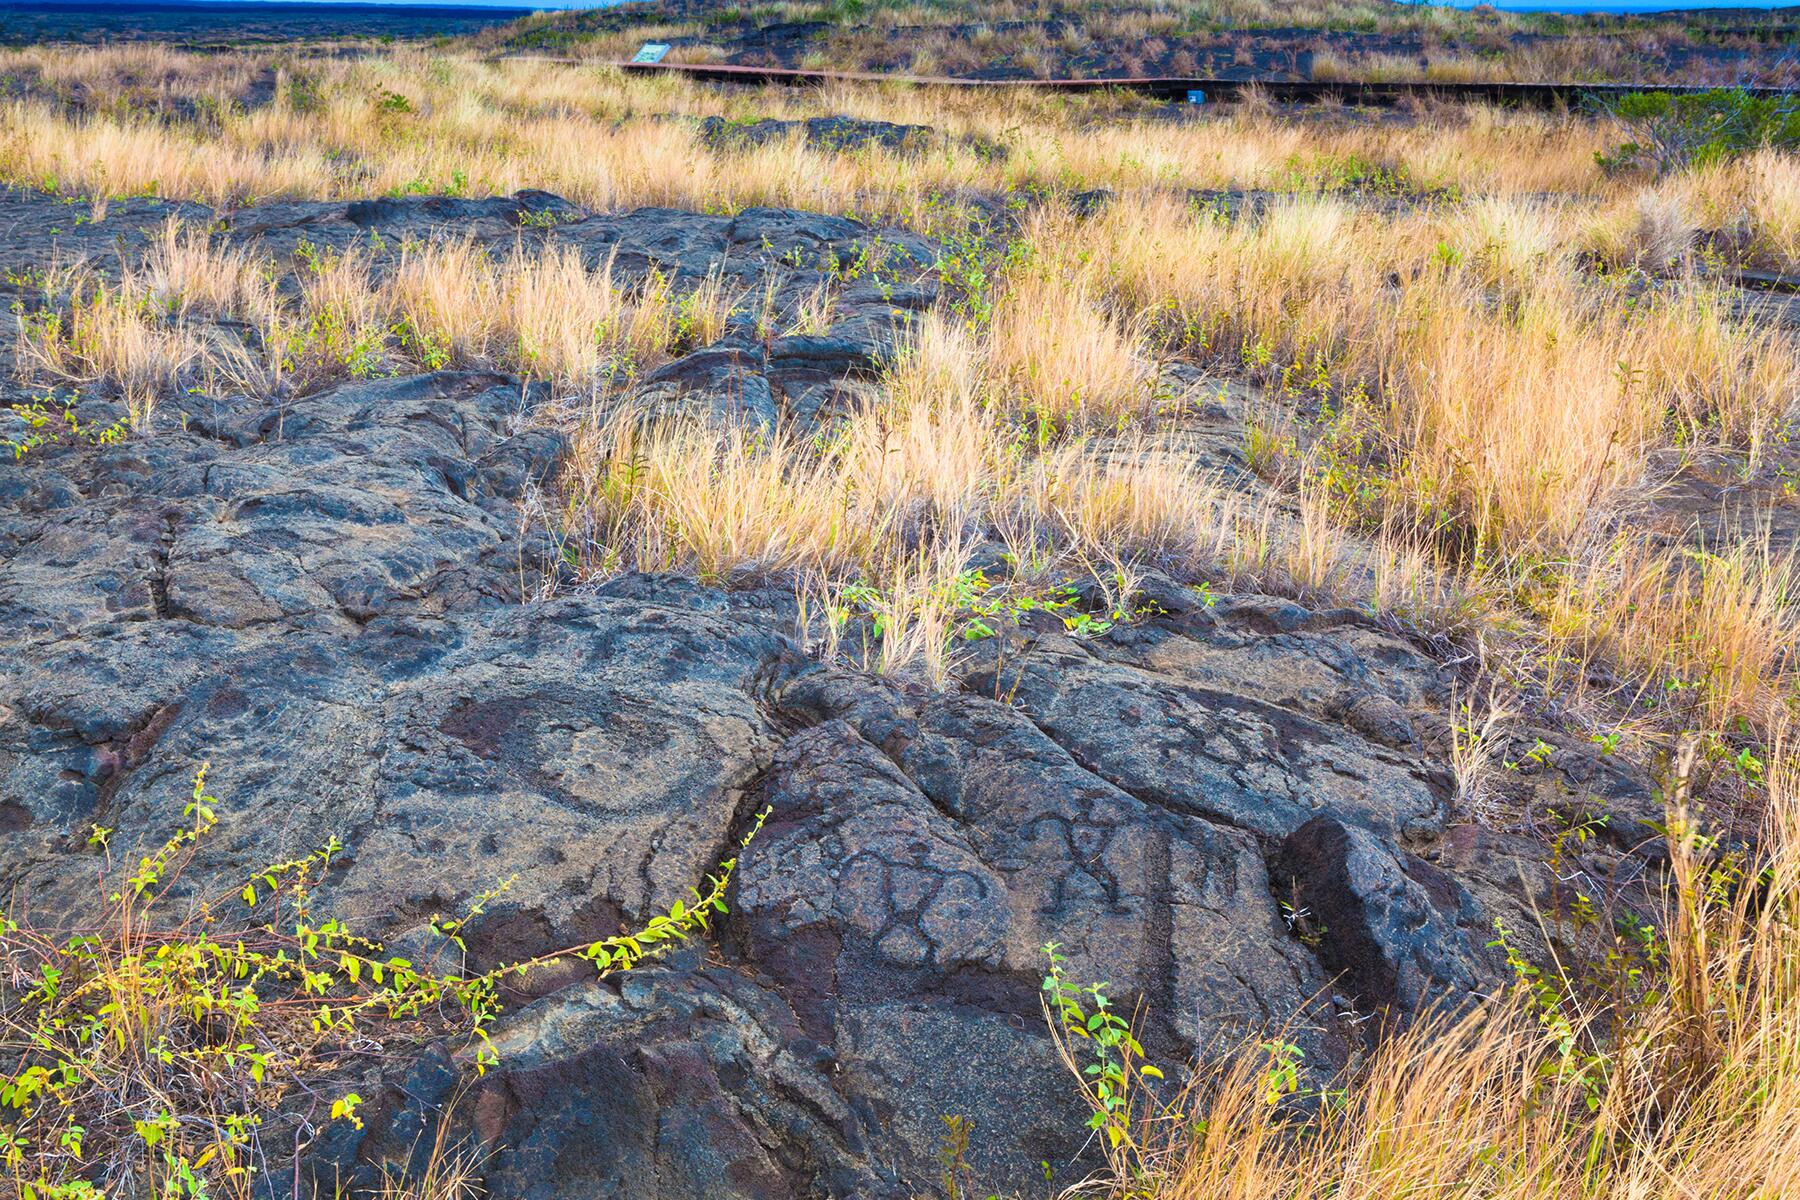 <a href='https://www.fodors.com/world/north-america/usa/hawaii/experiences/news/photos/cant-miss-historical-sites-to-visit-in-hawaii#'>From &quot;11 Fascinating Historical Sites in Hawaii That Go Beyond Pearl Harbor: Pu'uloa Petroglyphs&quot;</a>